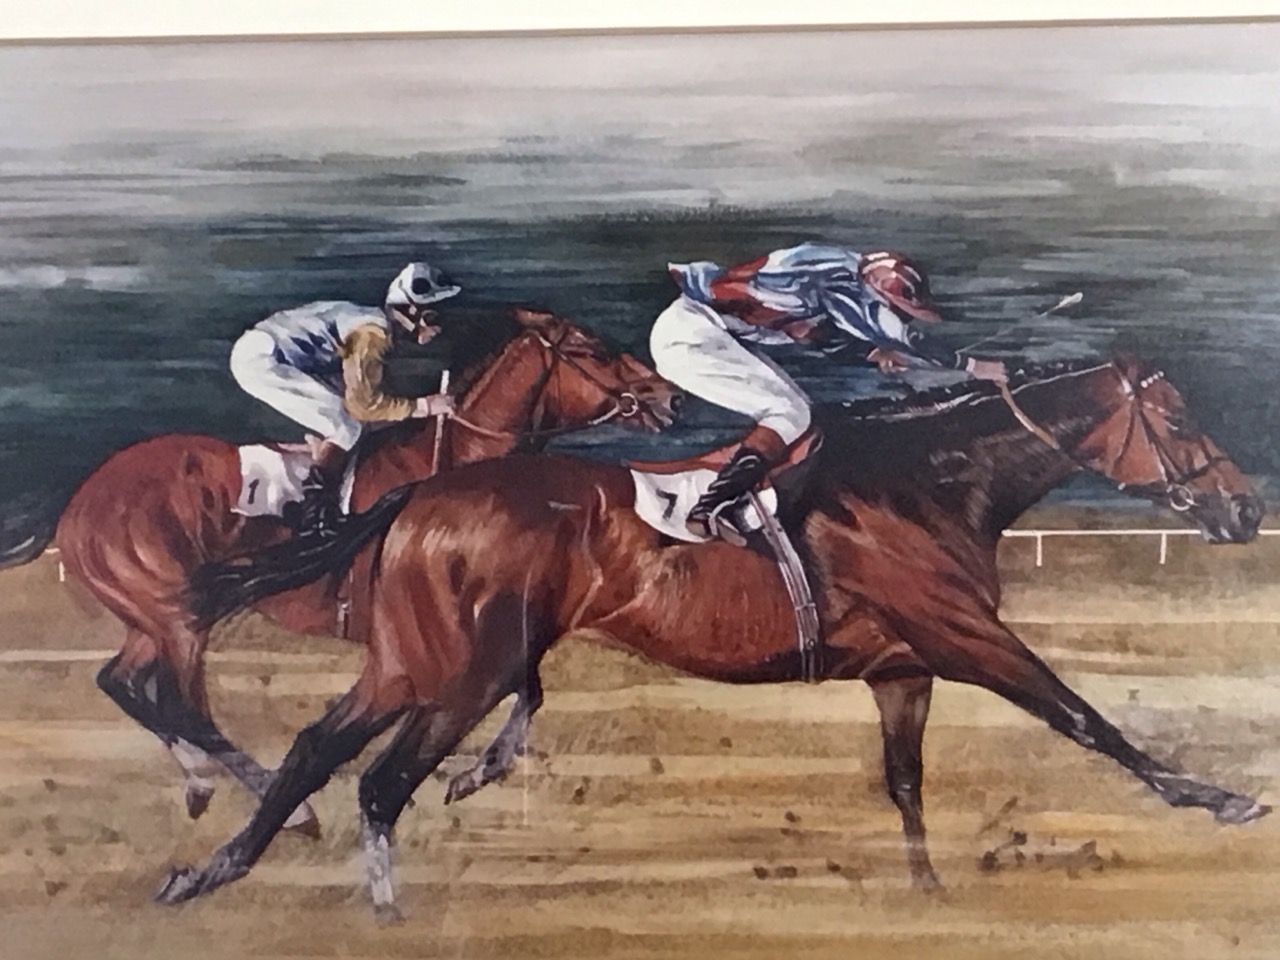 Keith Proctor, coloured prints, horse racing subjects, titled On the Line & Desert Orchid, - Image 3 of 3